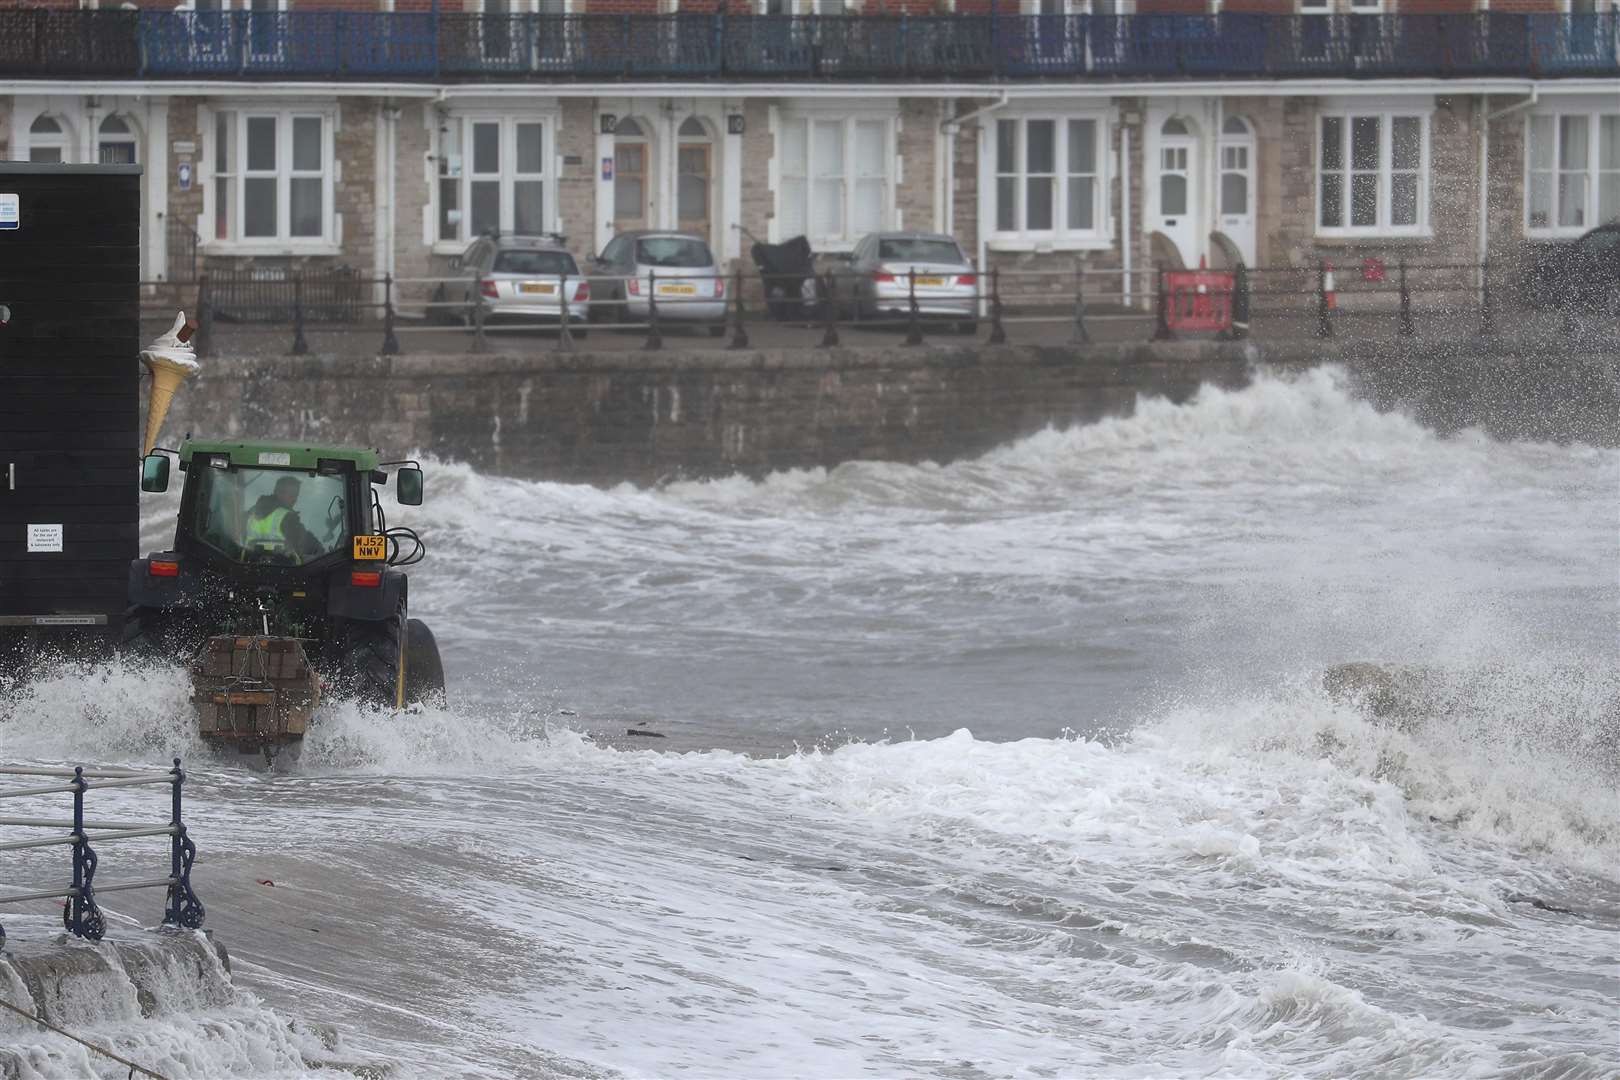 Stormy weather in October saw efforts to deliver flood protection in the face of the ongoing coronavirus battle (Steve Parsons/PA)